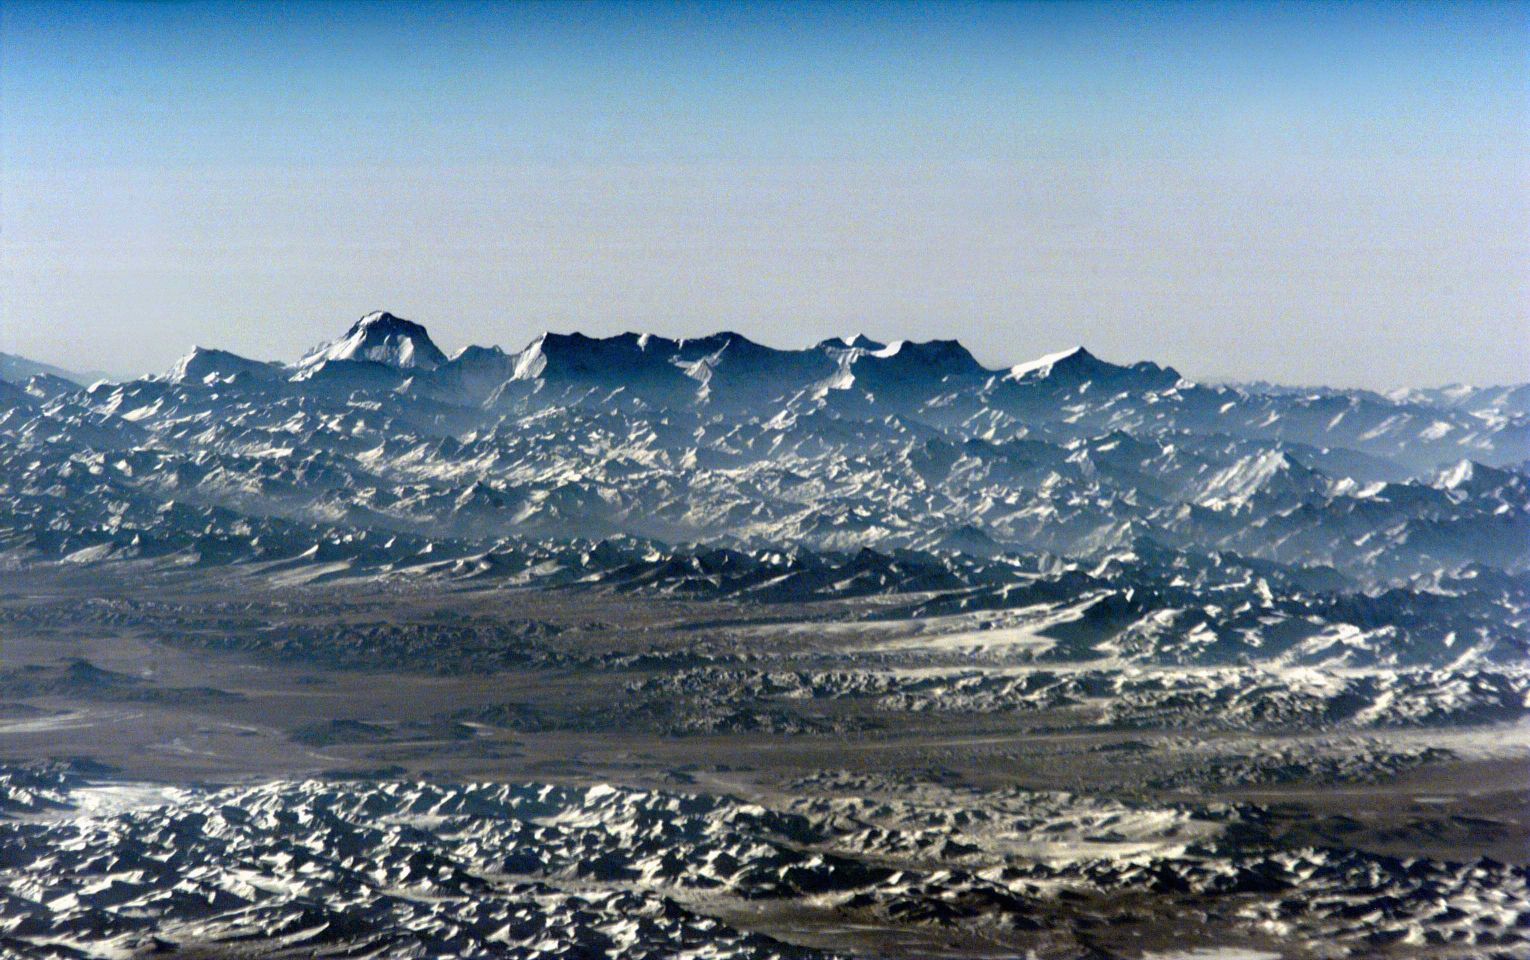 Mount Dhaulagiri as seen from 200 miles up from SpaceShuttle.